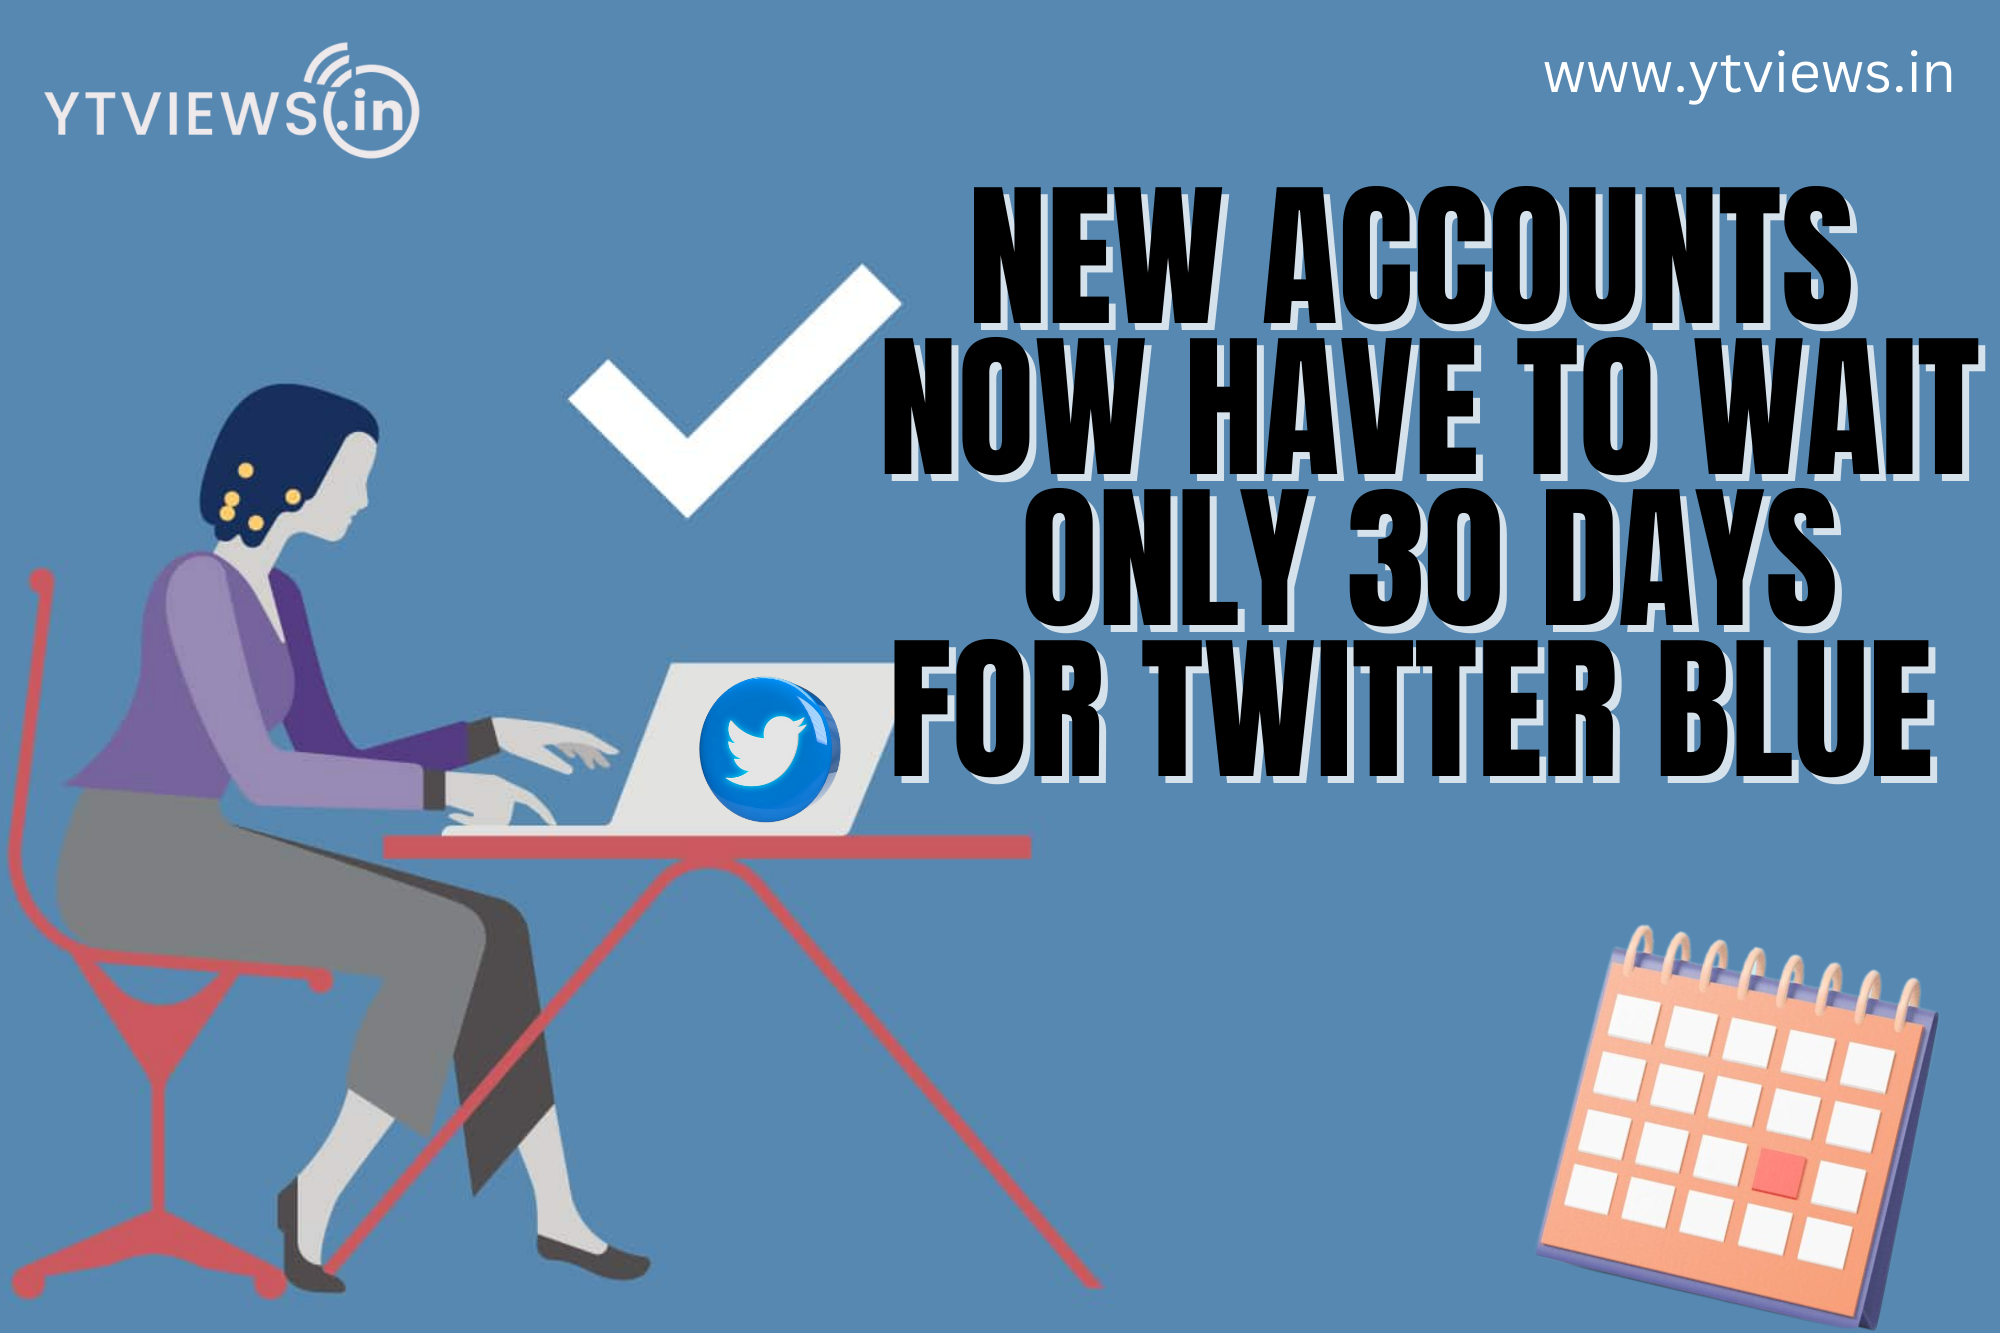 New accounts now have to wait only 30 days for Twitter Blue